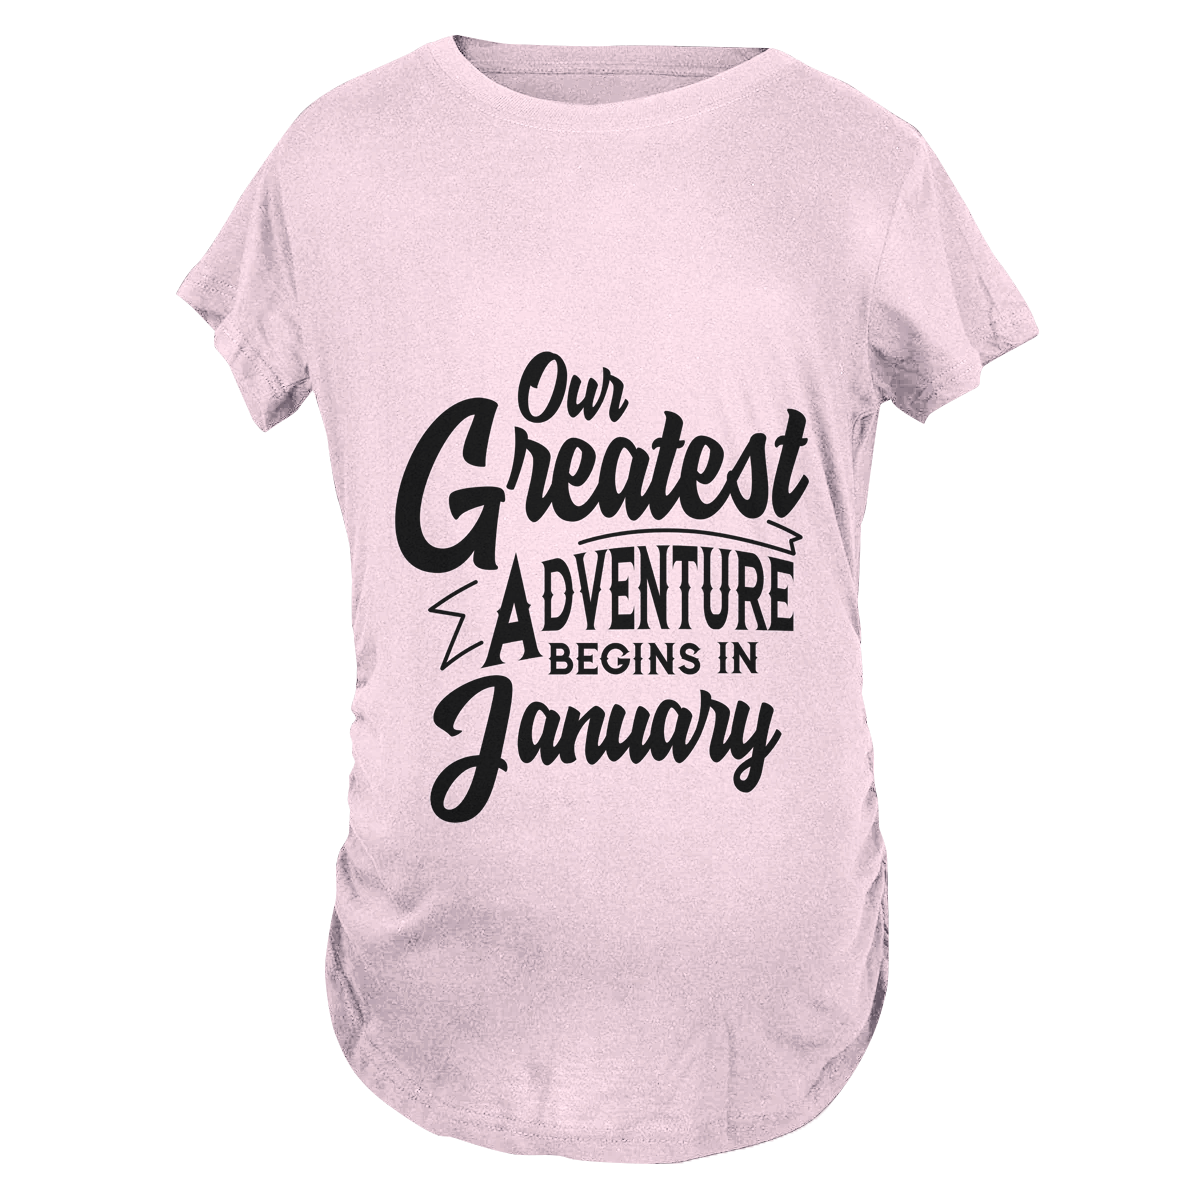 Our Greatest Adventure Begins in January Maternity T-Shirt